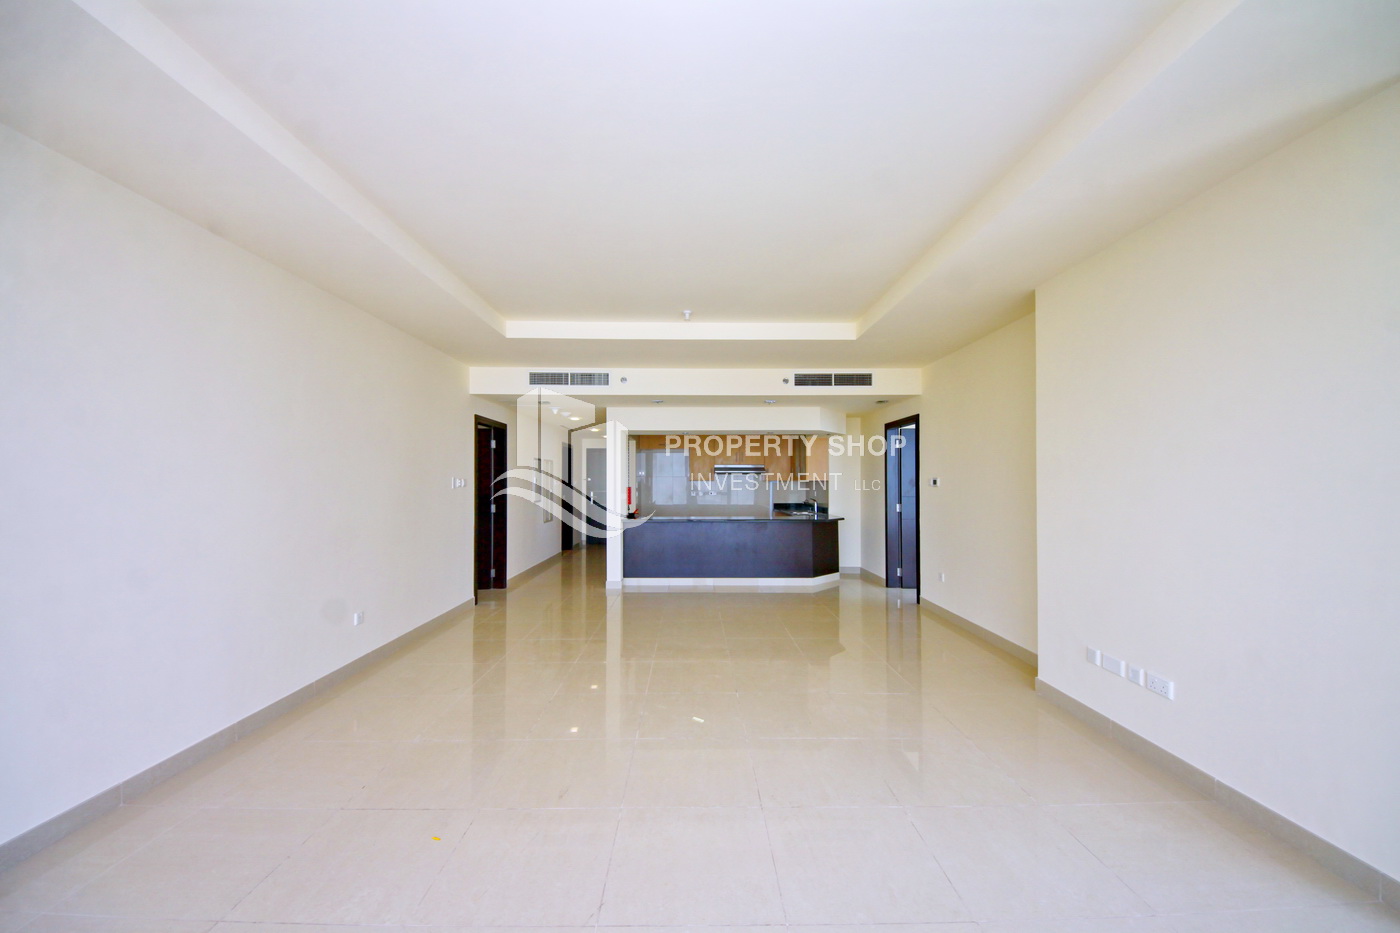 3bedrooms apartment In al reem Island ,FOR SALE!!!!